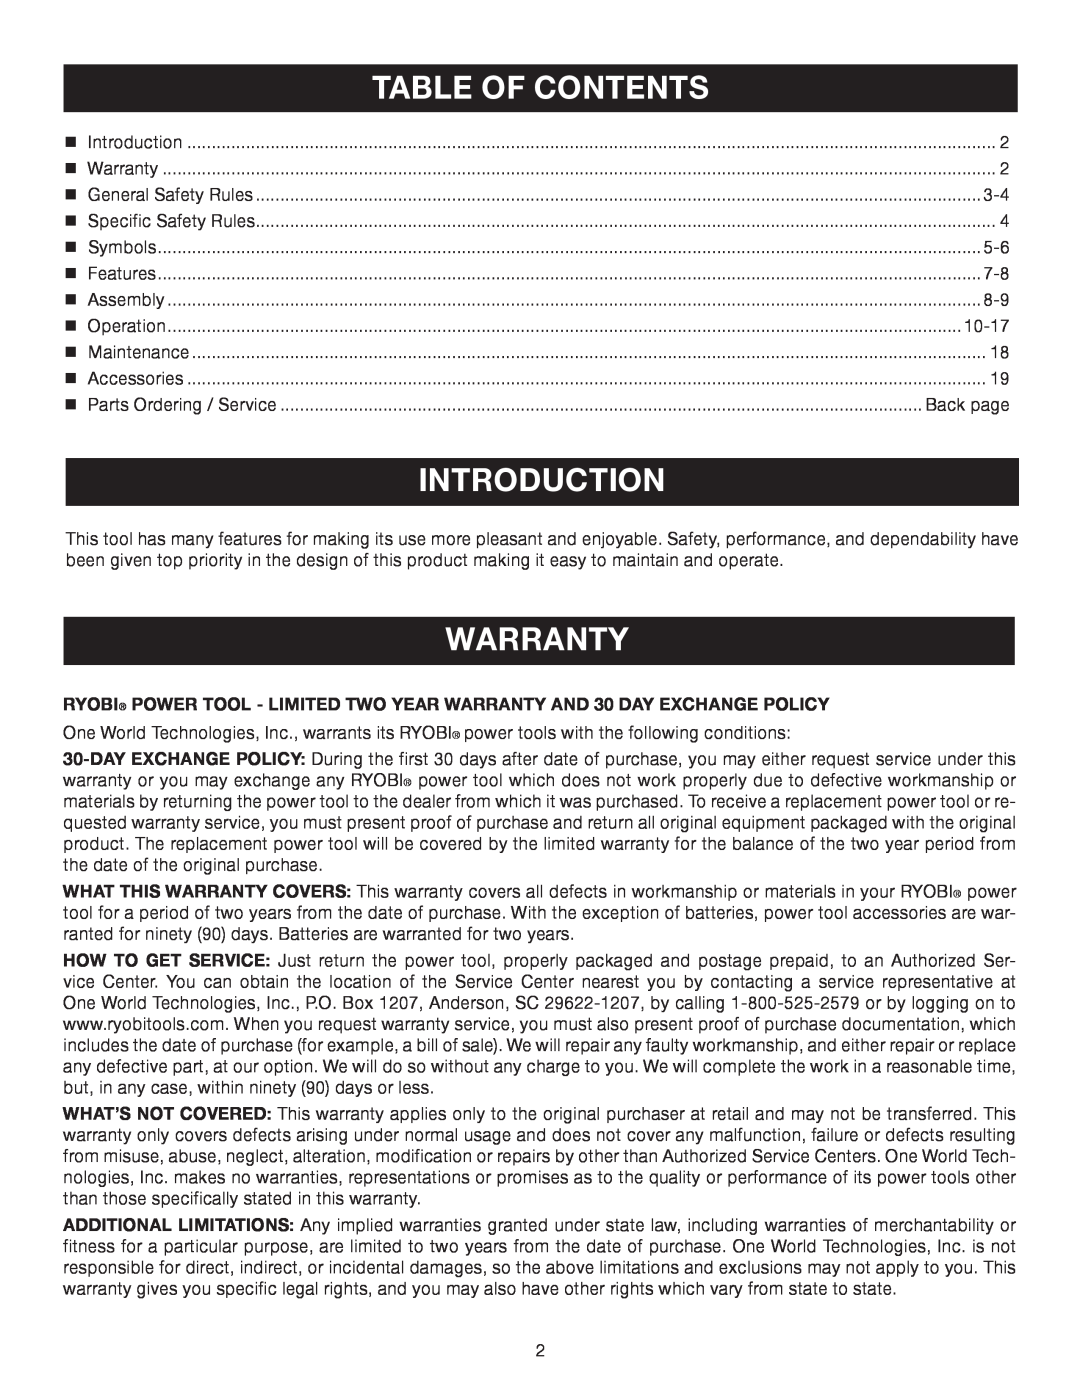 Ryobi P600 manual Introduction, Warranty, Table Of Contents 